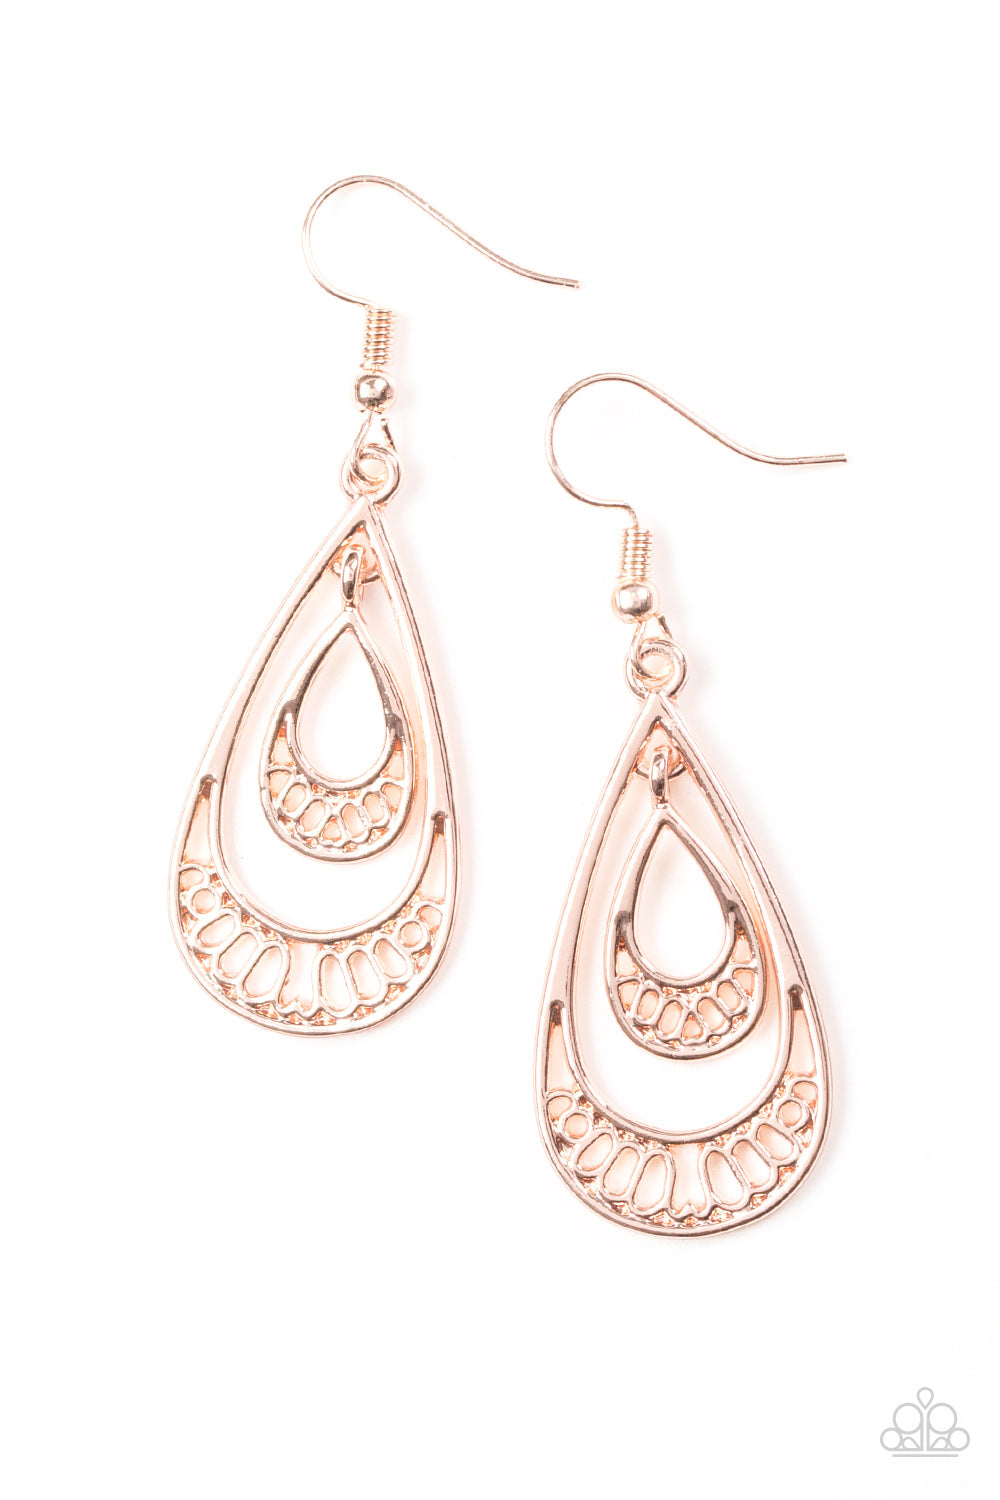 Paparazzi Accessories REIGNed Out - Rose Gold Earrings 